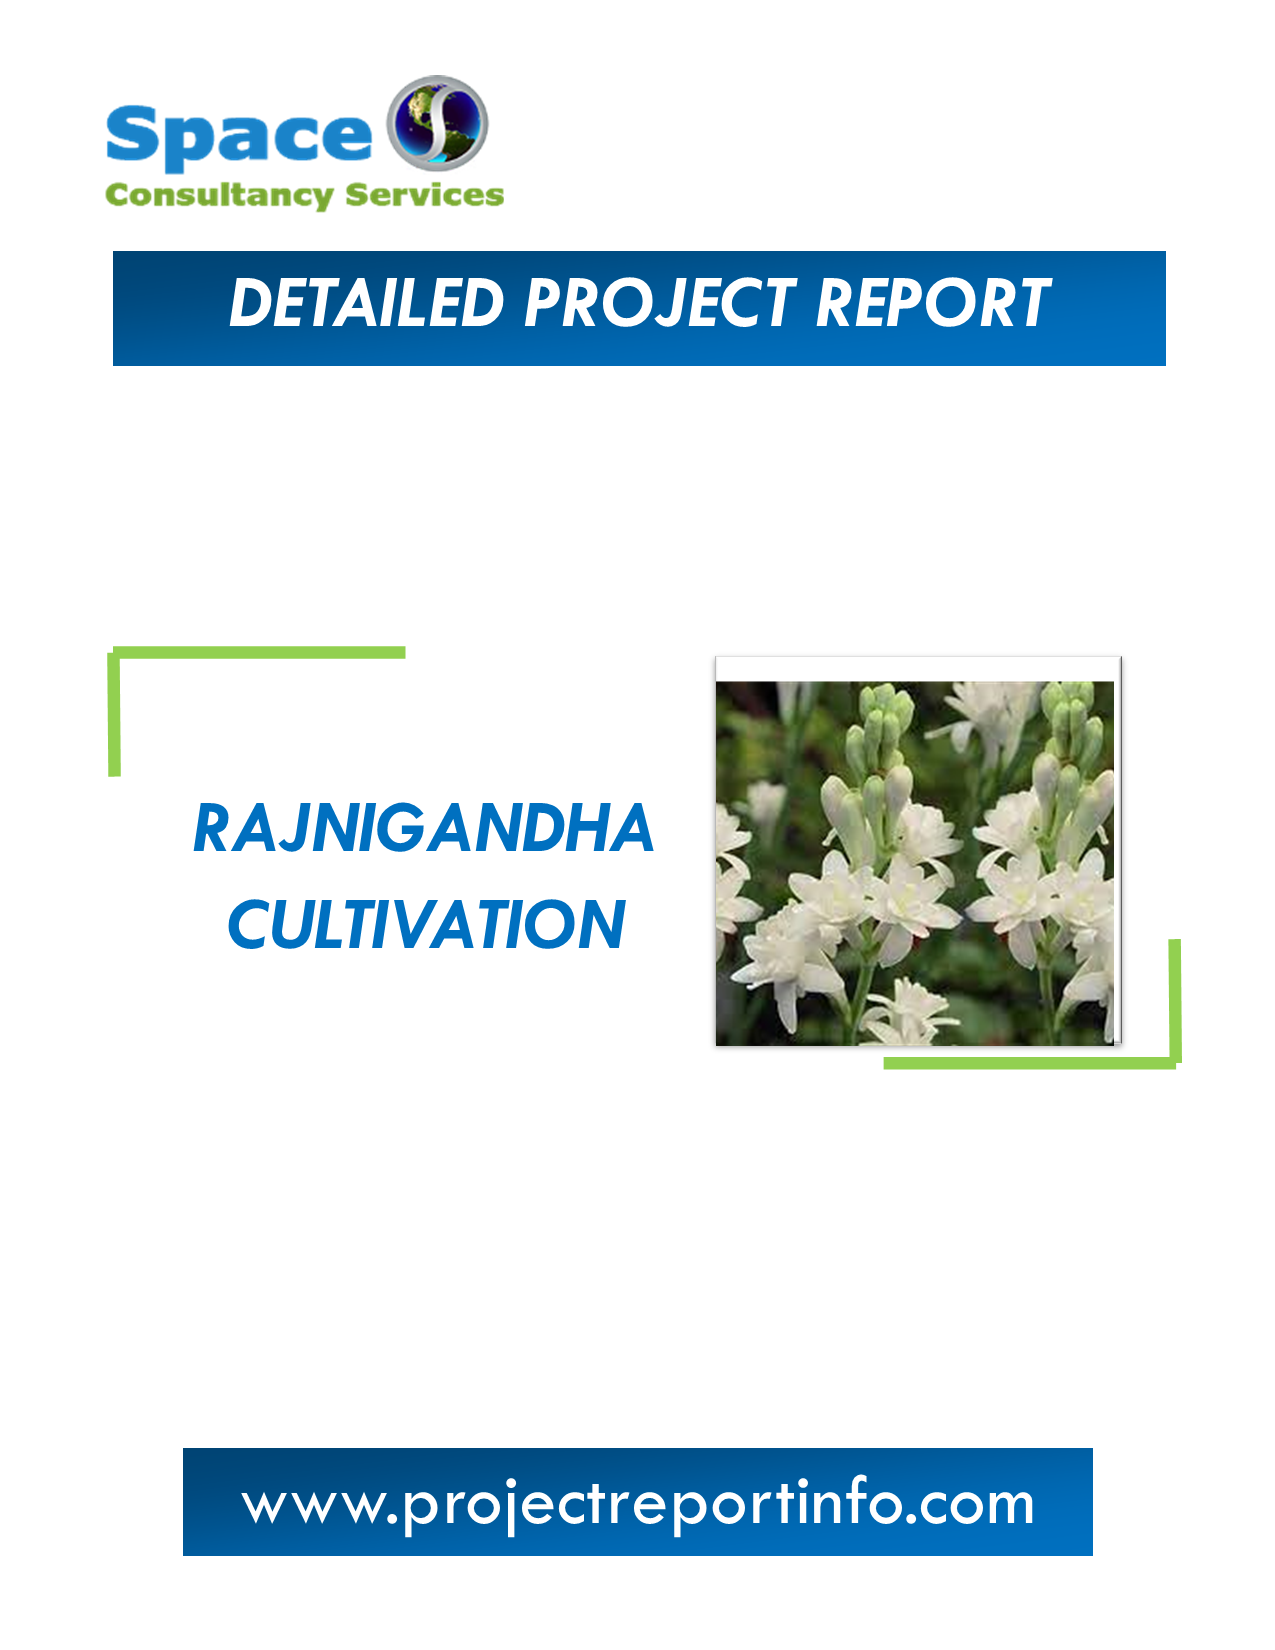 Project Report on Rajnigandha Cultivation